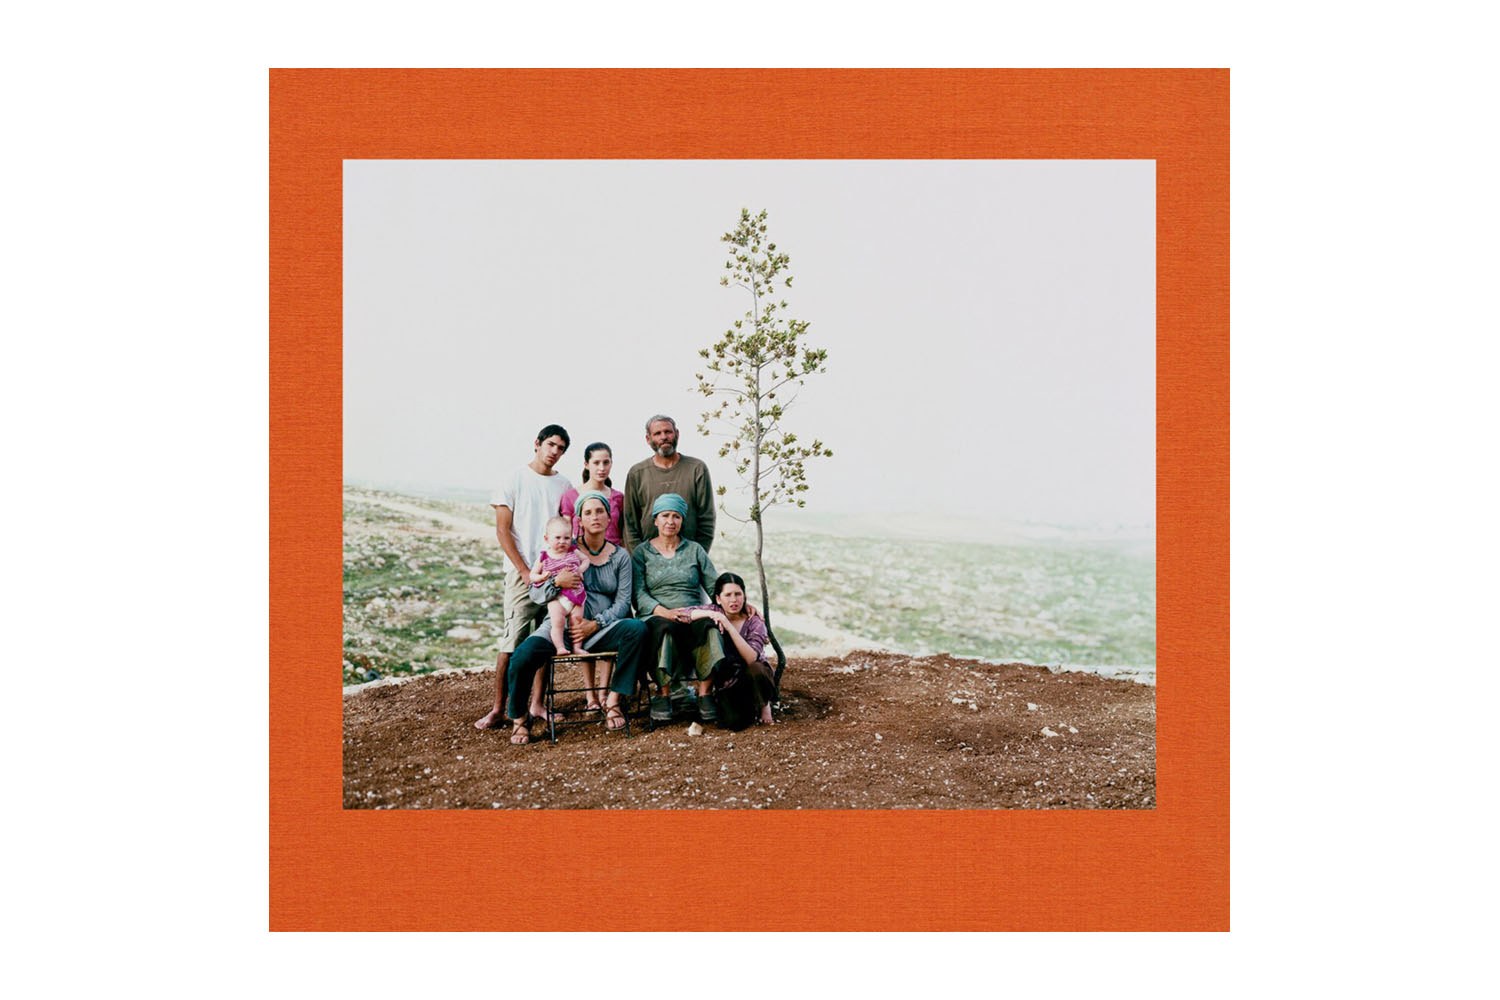 Nick Waplington's Settlement, published by MACK
                              A topogographic survey of Jewish identity in Palestine, Waplington photographs families living in settlements in and around Gaza and observes their struggles to find stability in the midst of conflict.